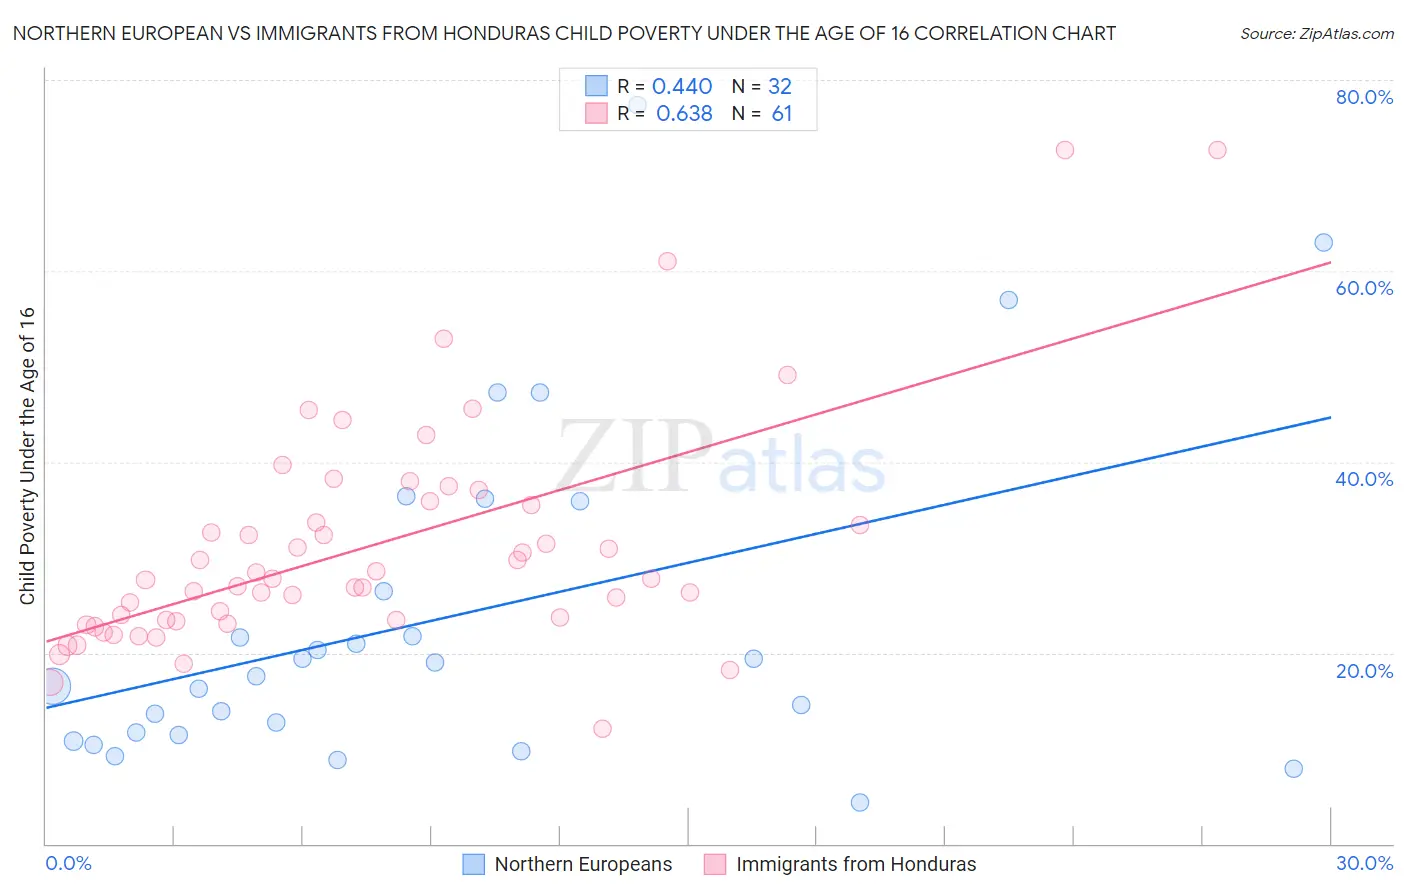 Northern European vs Immigrants from Honduras Child Poverty Under the Age of 16